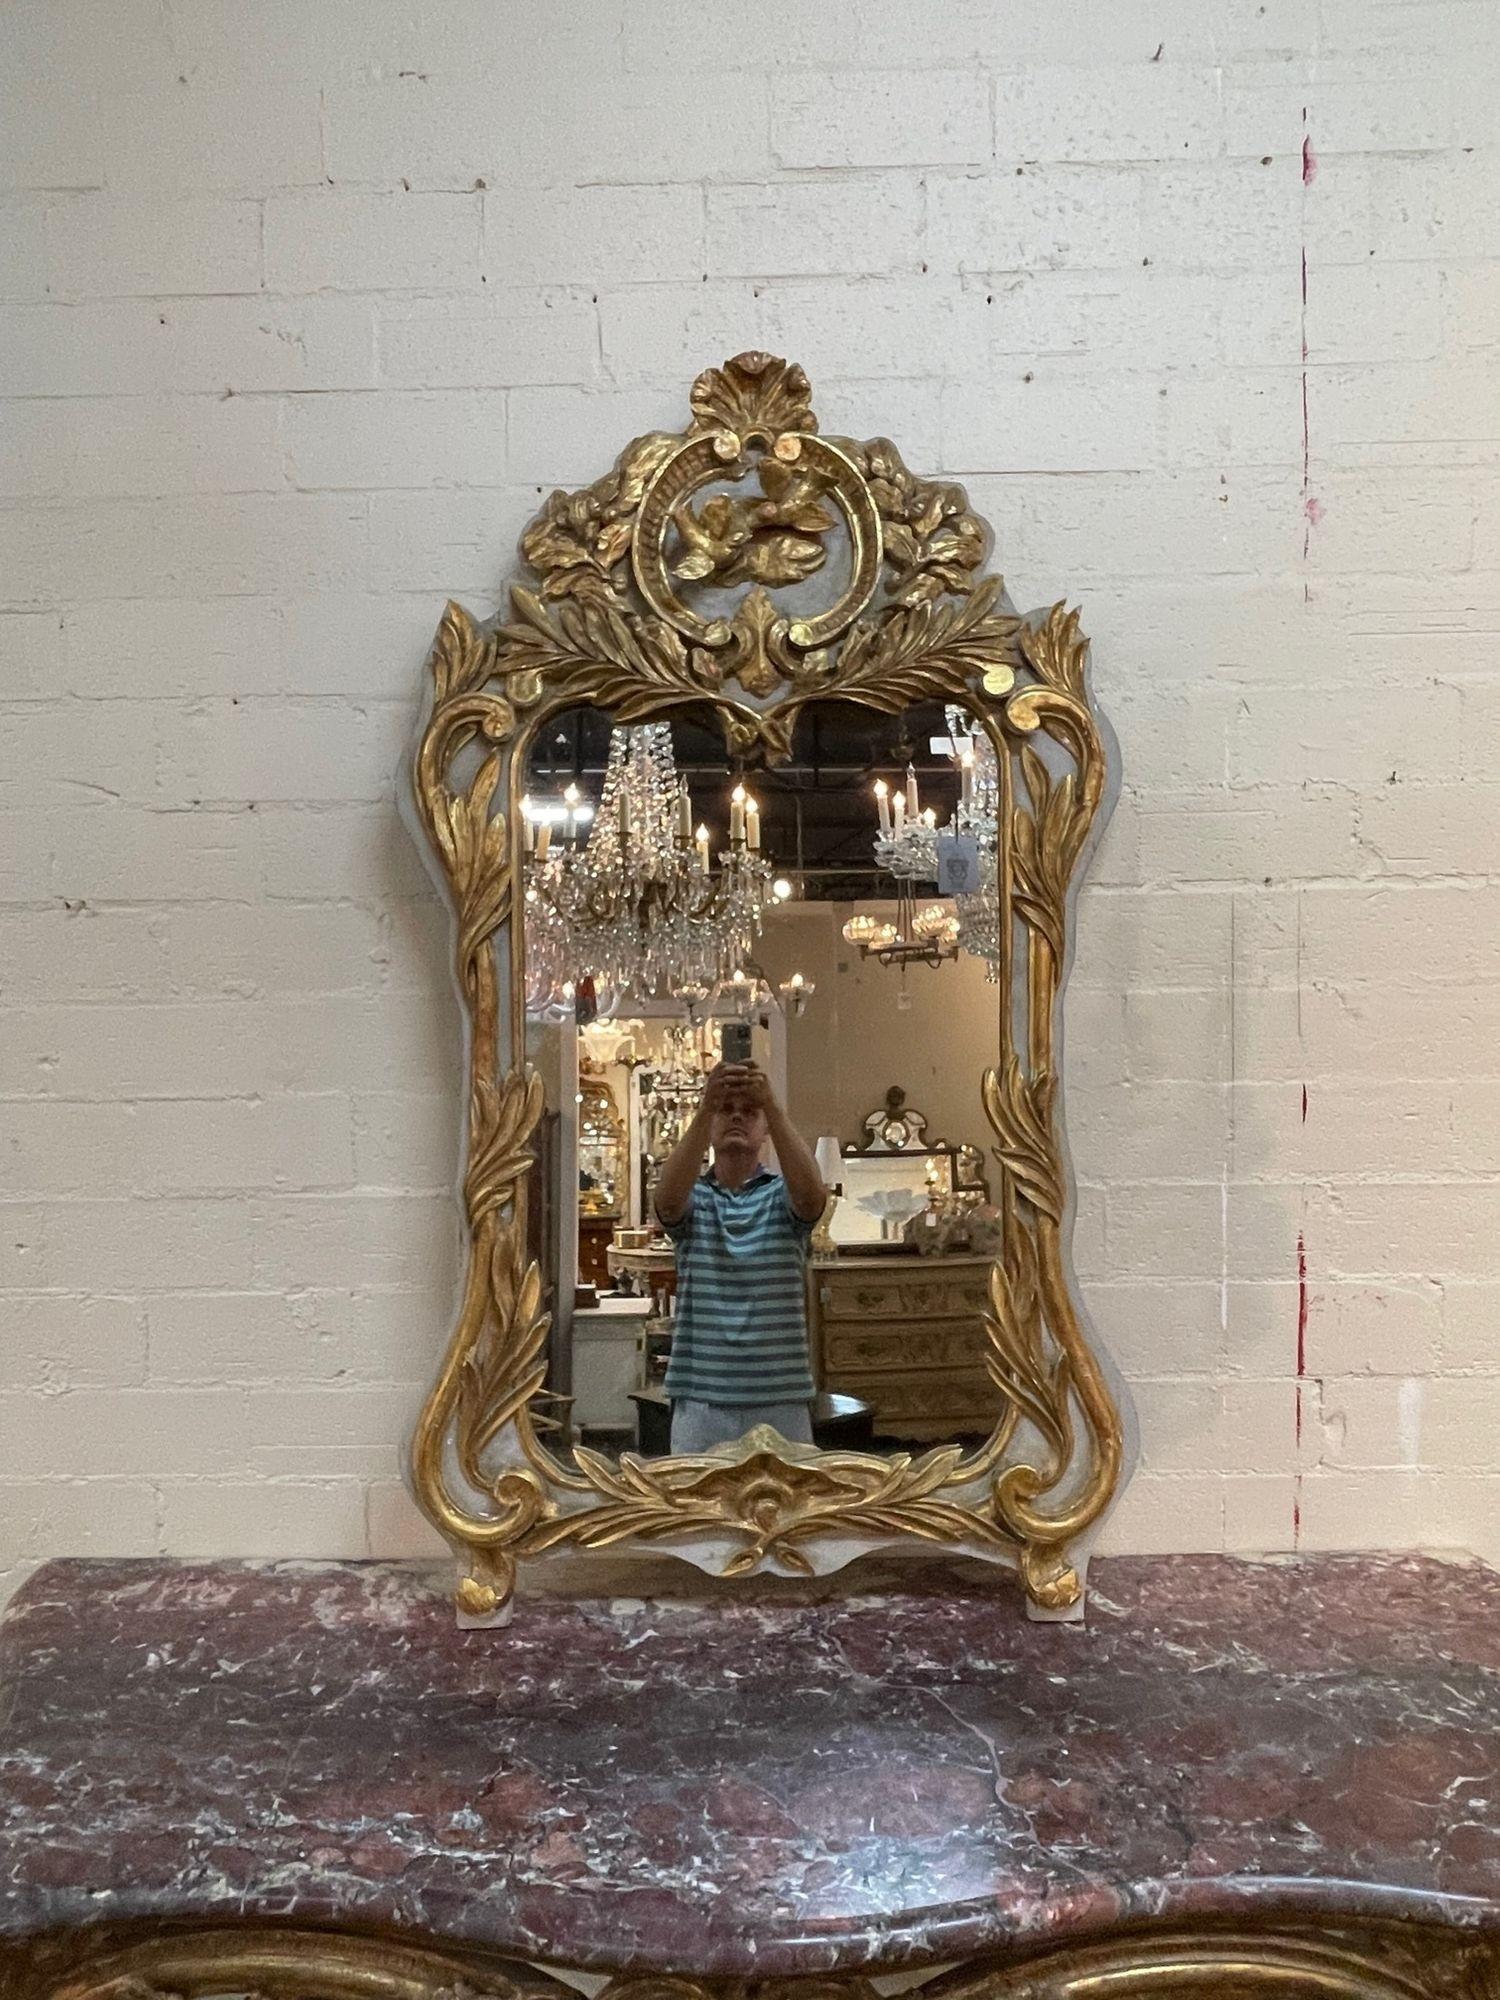 Very fine early 19th century carved and giltwood mirror. Featuring exceptional carvings including an elaborate crest at the top with birds. An exquisite piece with very fine craftsmanship! Stunning!